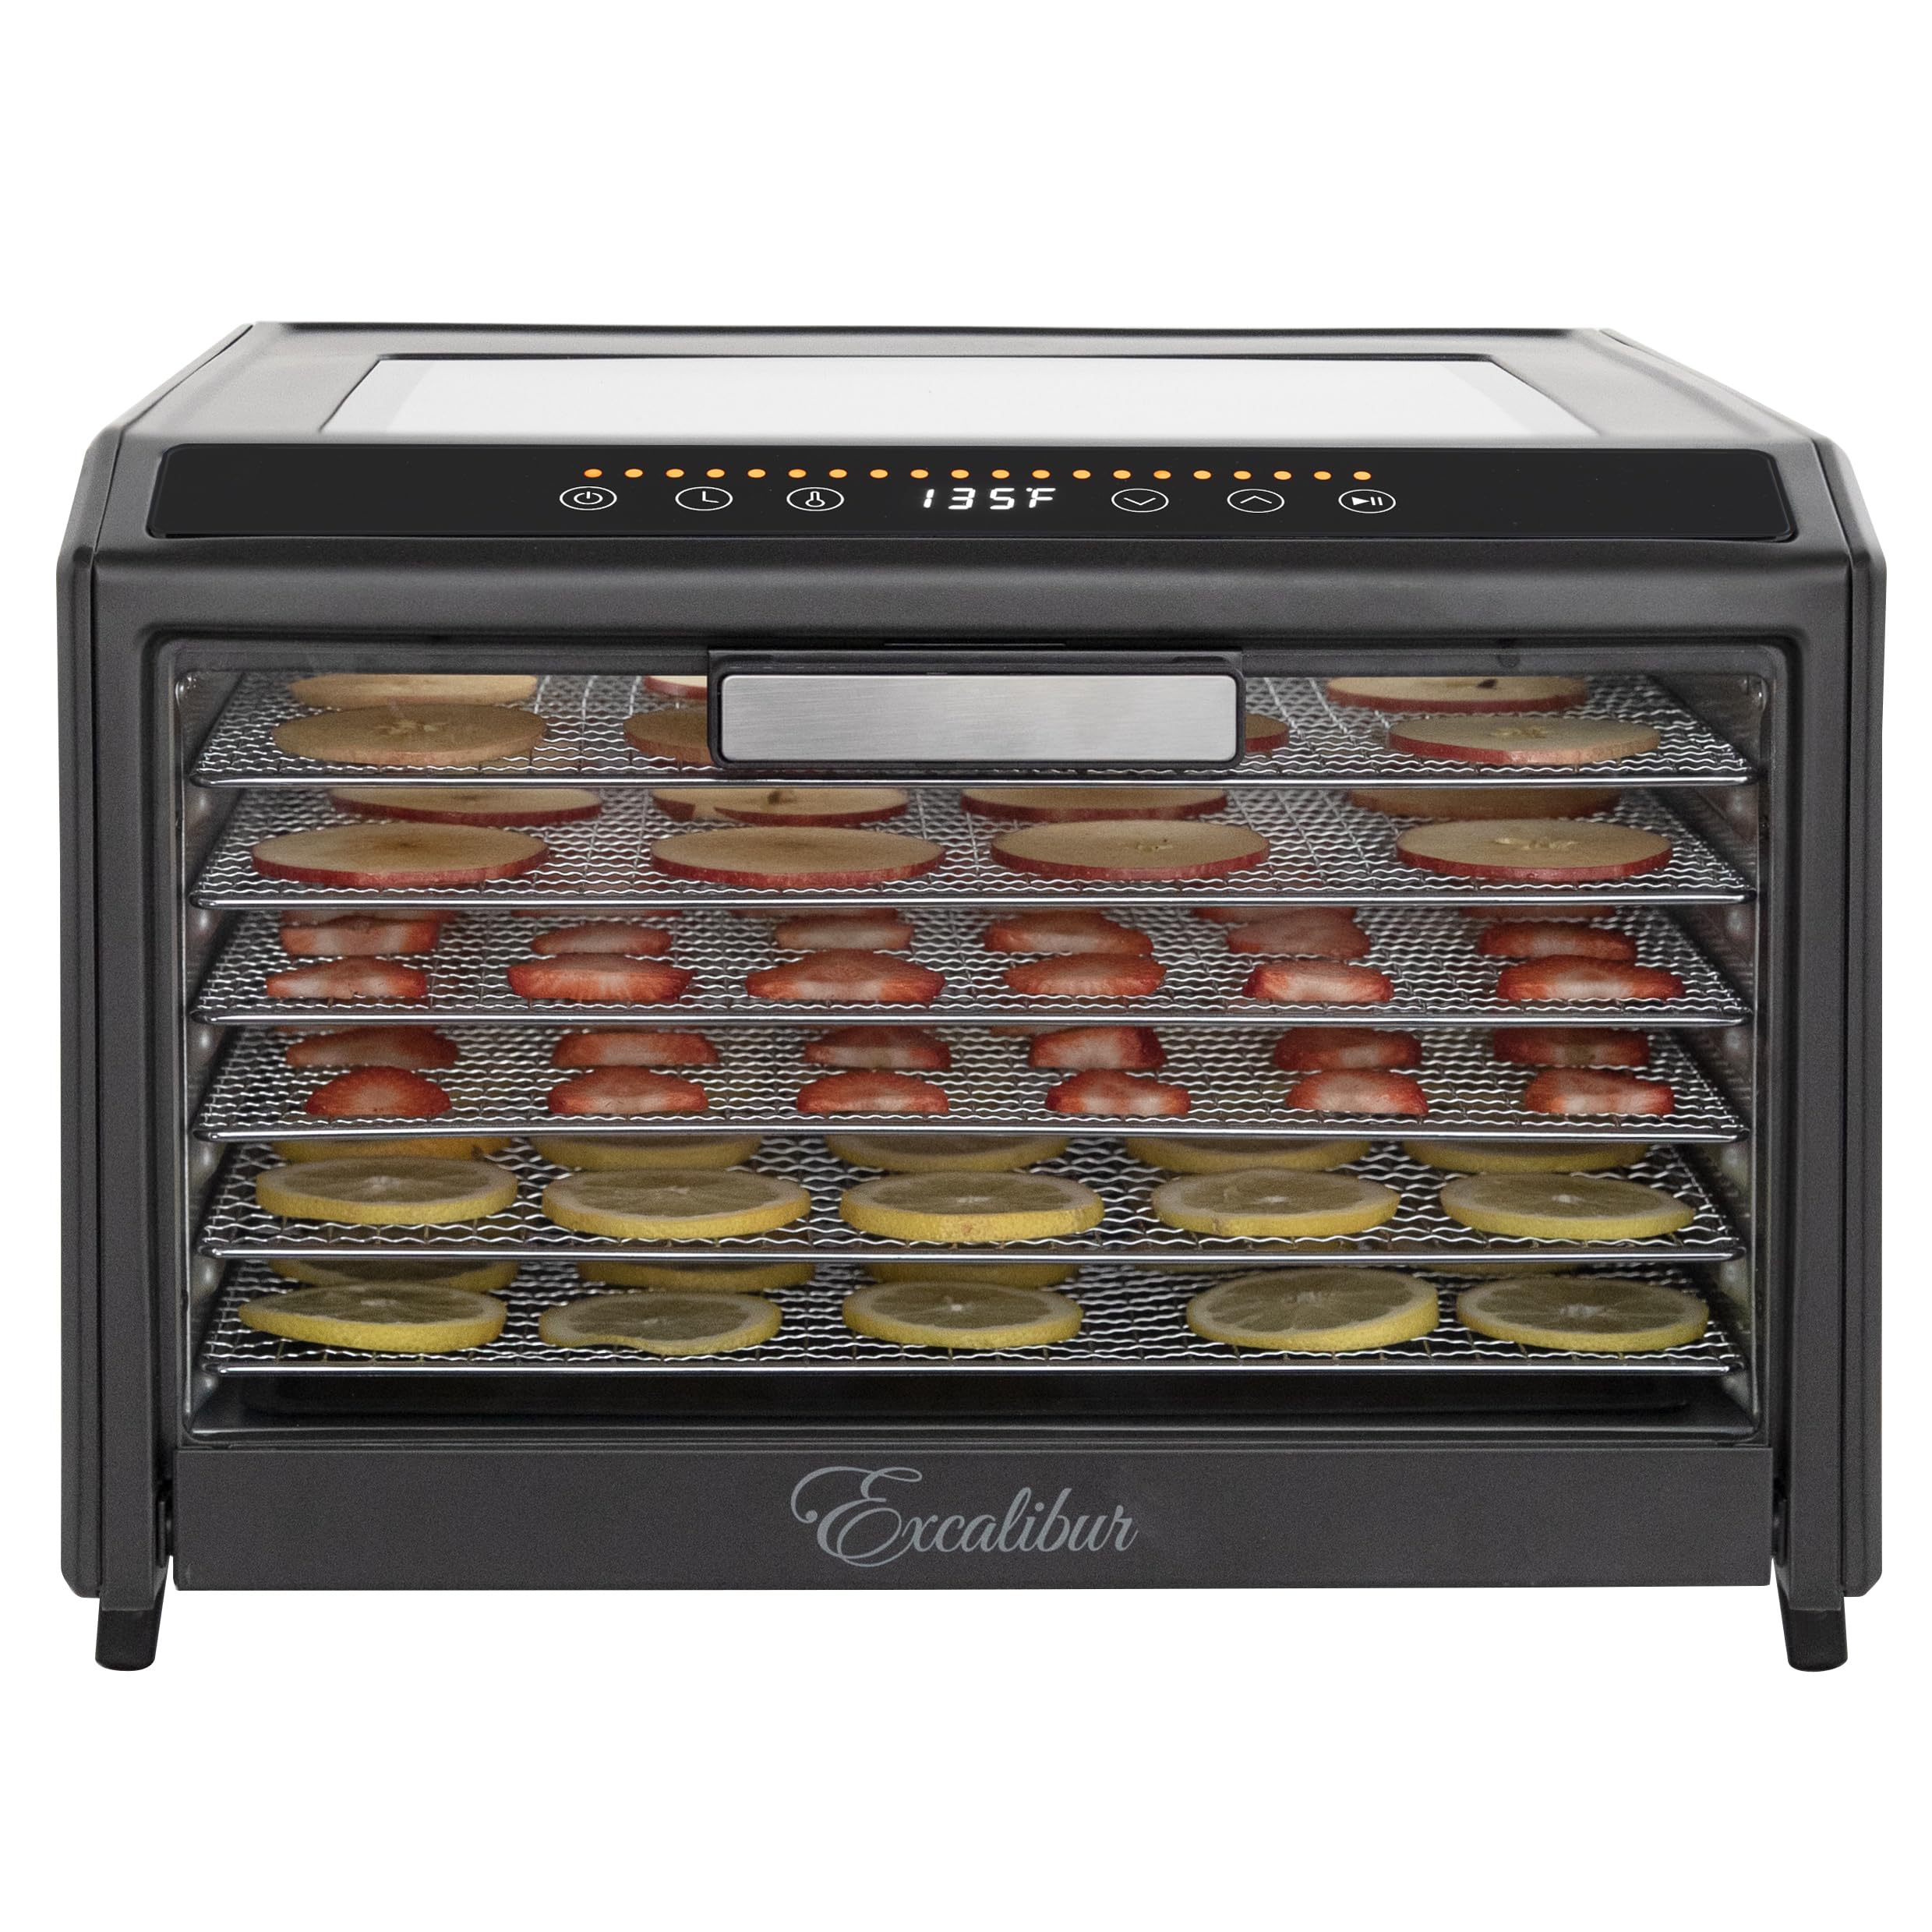 Excalibur Electric Food Dehydrator Performance Series 6-Tray with Adjustable Temperature Control Includes Stainless Steel Drying Trays Glass Door Top View Window and LED Display Progress Bar, Black